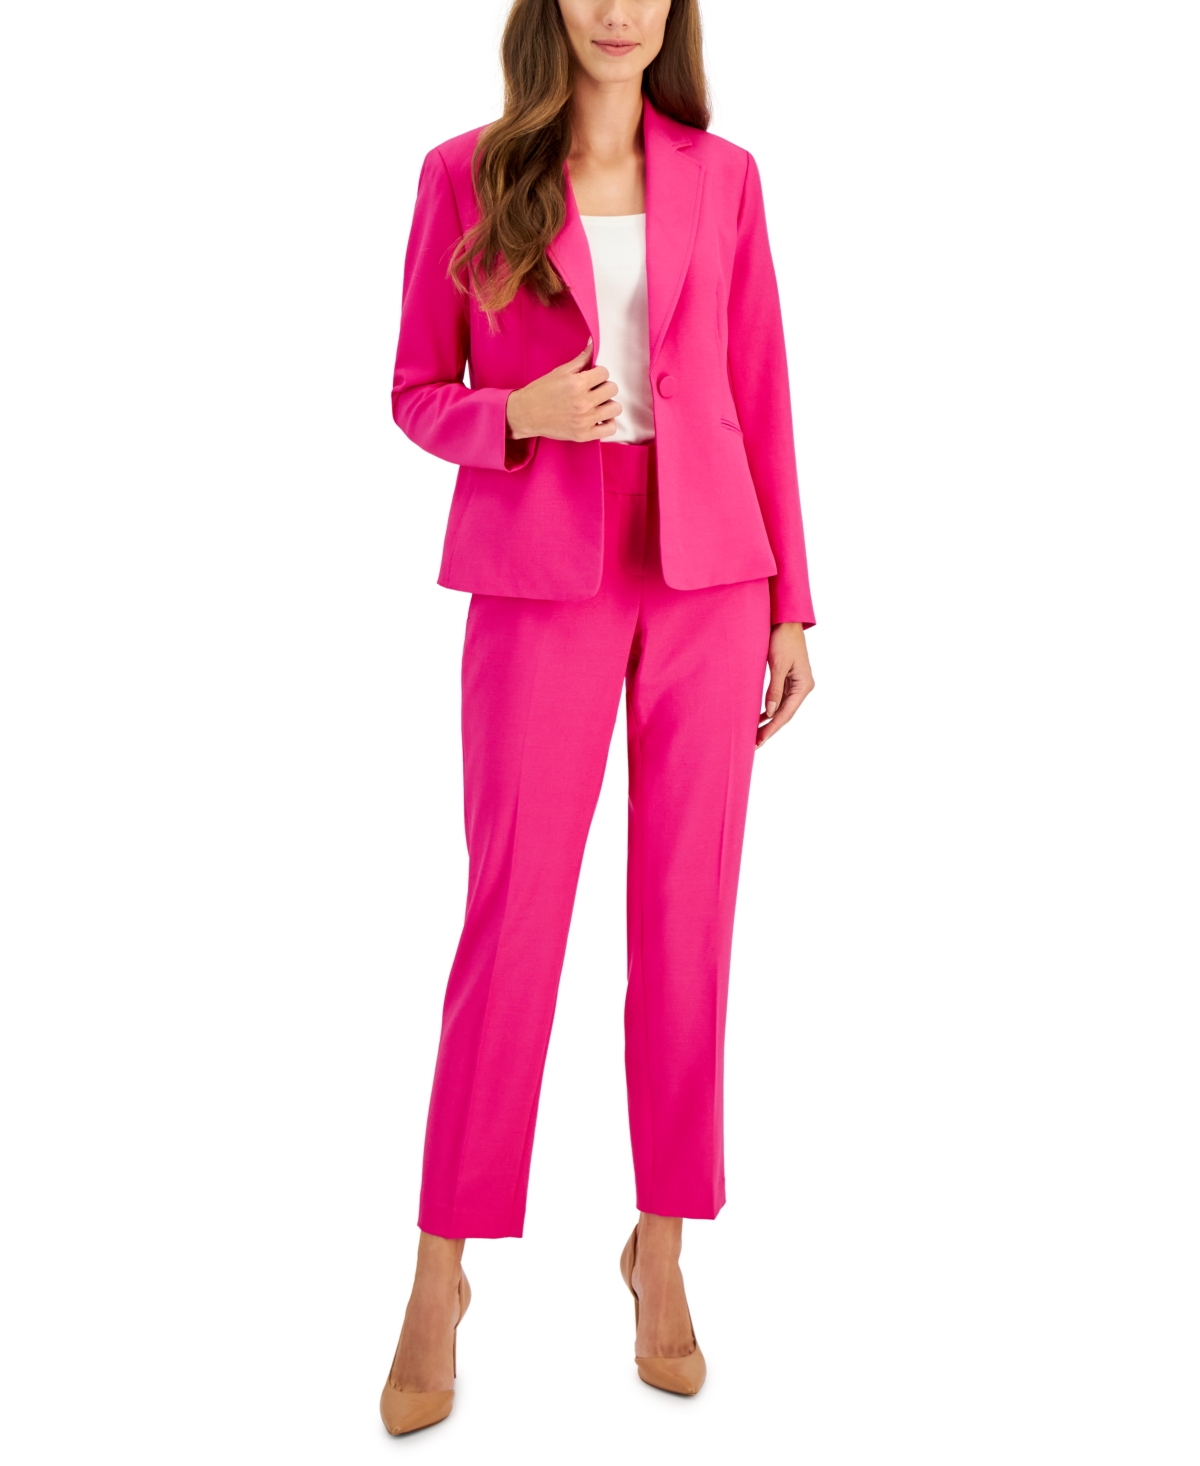 Le Suit Women's Framed Twill Two-Button Pantsuit, Regular and